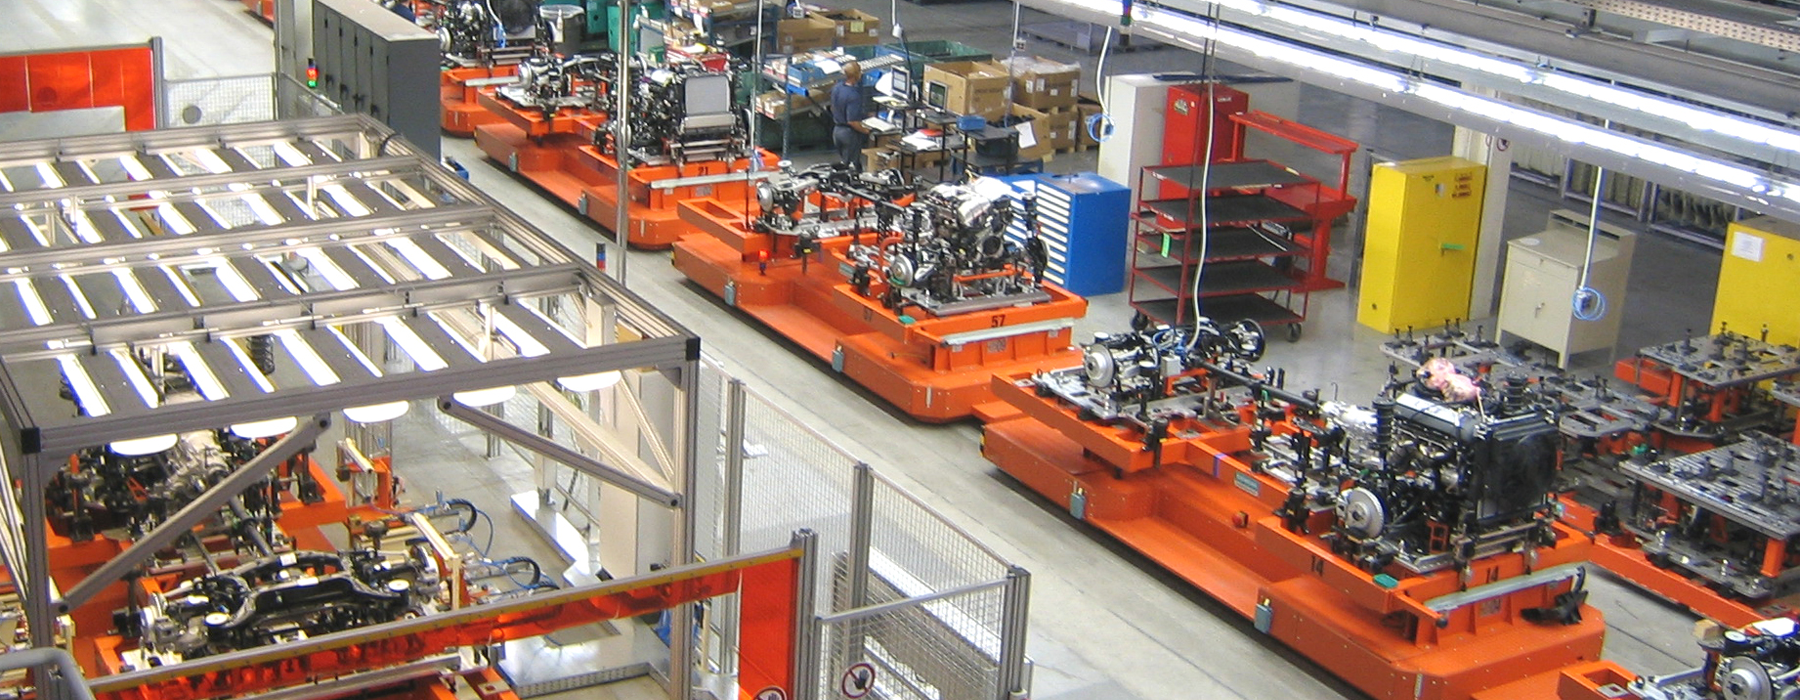 VAHLE Automated Guided Vehicle (AGV) BMW